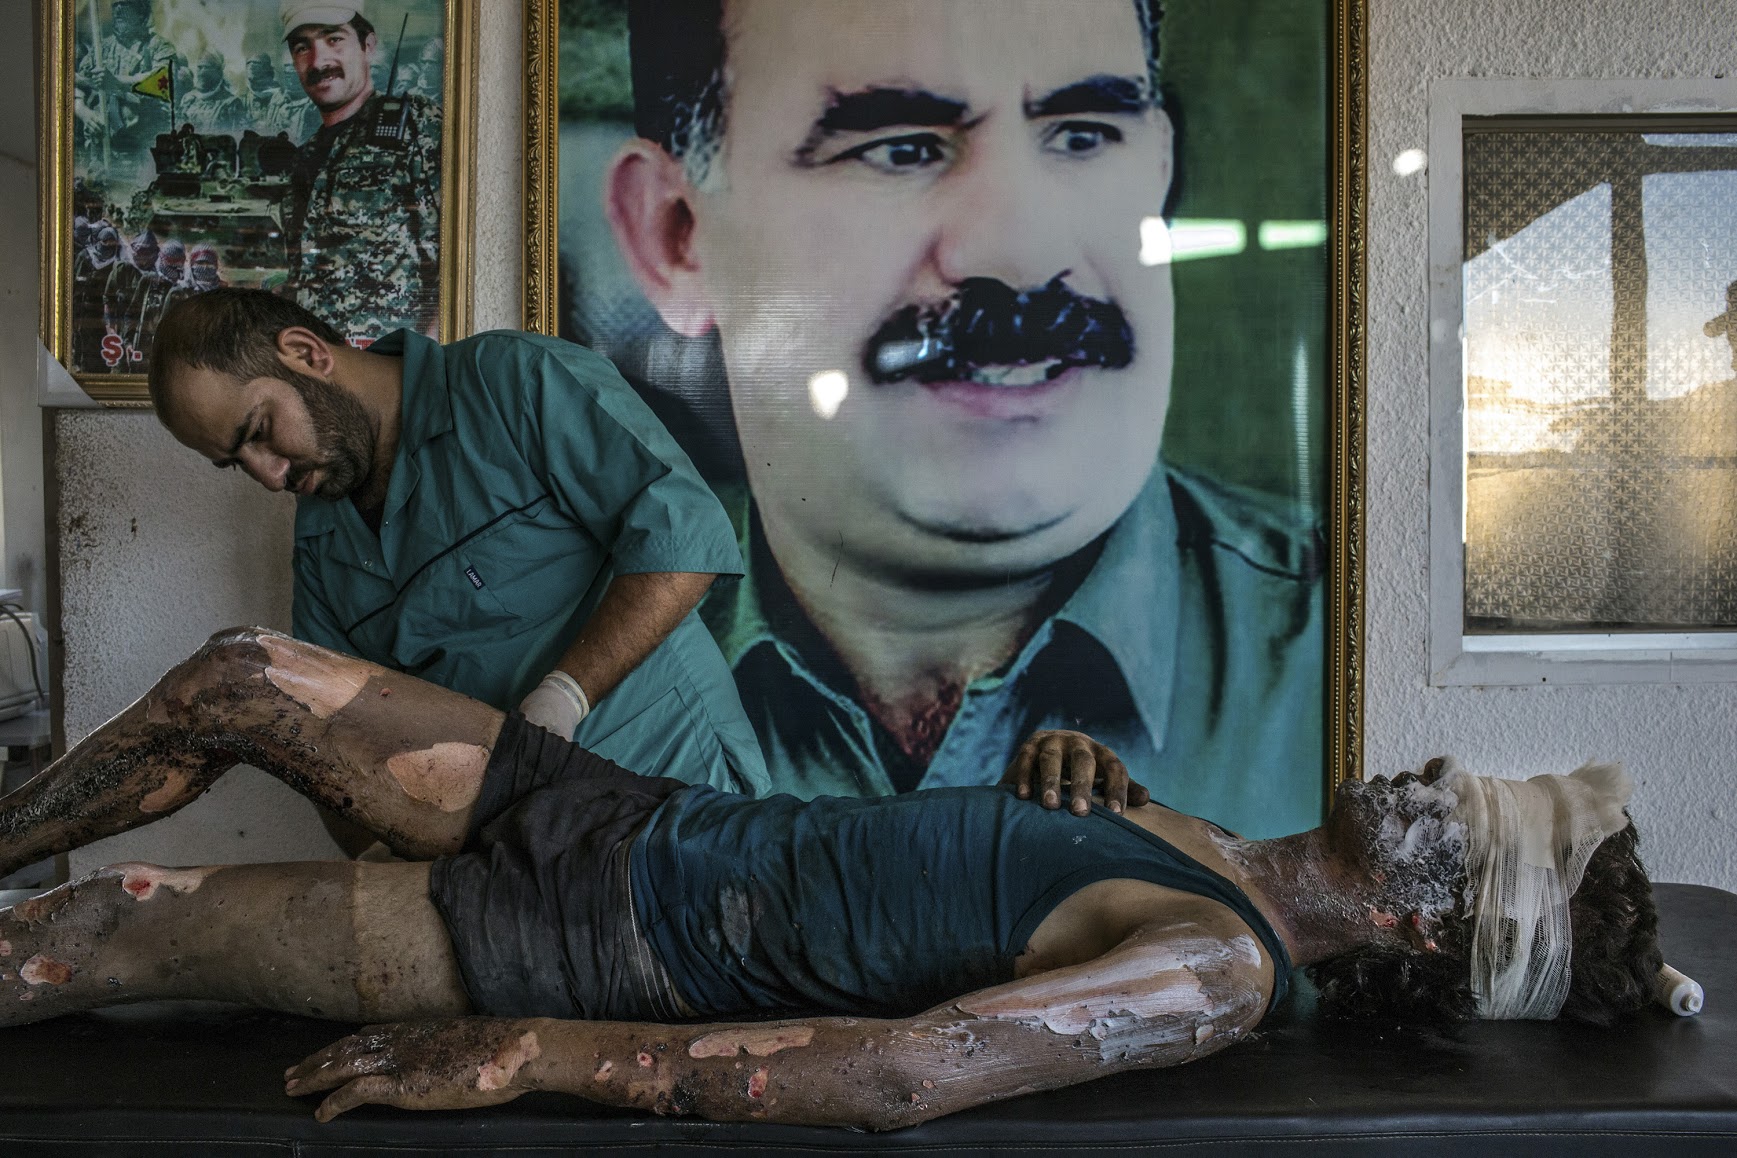 3. Hasaka, Syria - August 1, 2015A doctor rubs ointment on the burns of Jacob, 16, in front of a poster of Abdullah Ocalan, center, the jailed leader of the Kurdistan Workers' Party, at a YPG hospital compound on the outskirts of Hasaka. According to YPG fighters at the scene, Jacob is an ISIS fighter from Deir al-Zour and the only survivior from an ambush made by YPG fighters over a truck alleged to carry ISIS fighters on the outskirts of Hasaka. Six ISIS fighters died in the attack, 5 of them completely disfigured by the explosion.